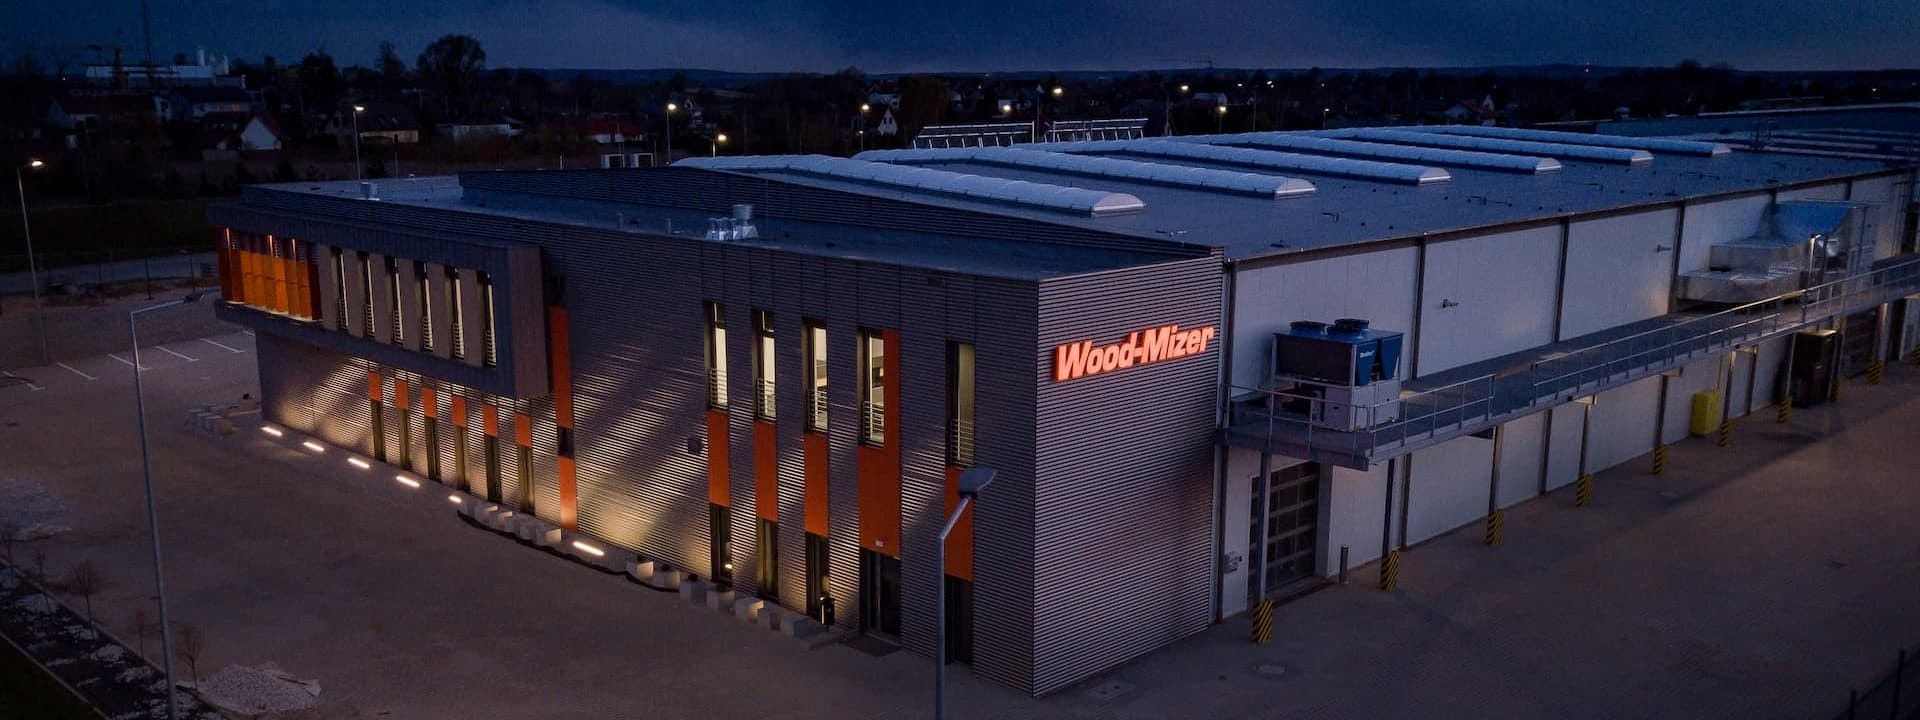 Wood-Mizer Europe Expands Production and Office Building in Poland  